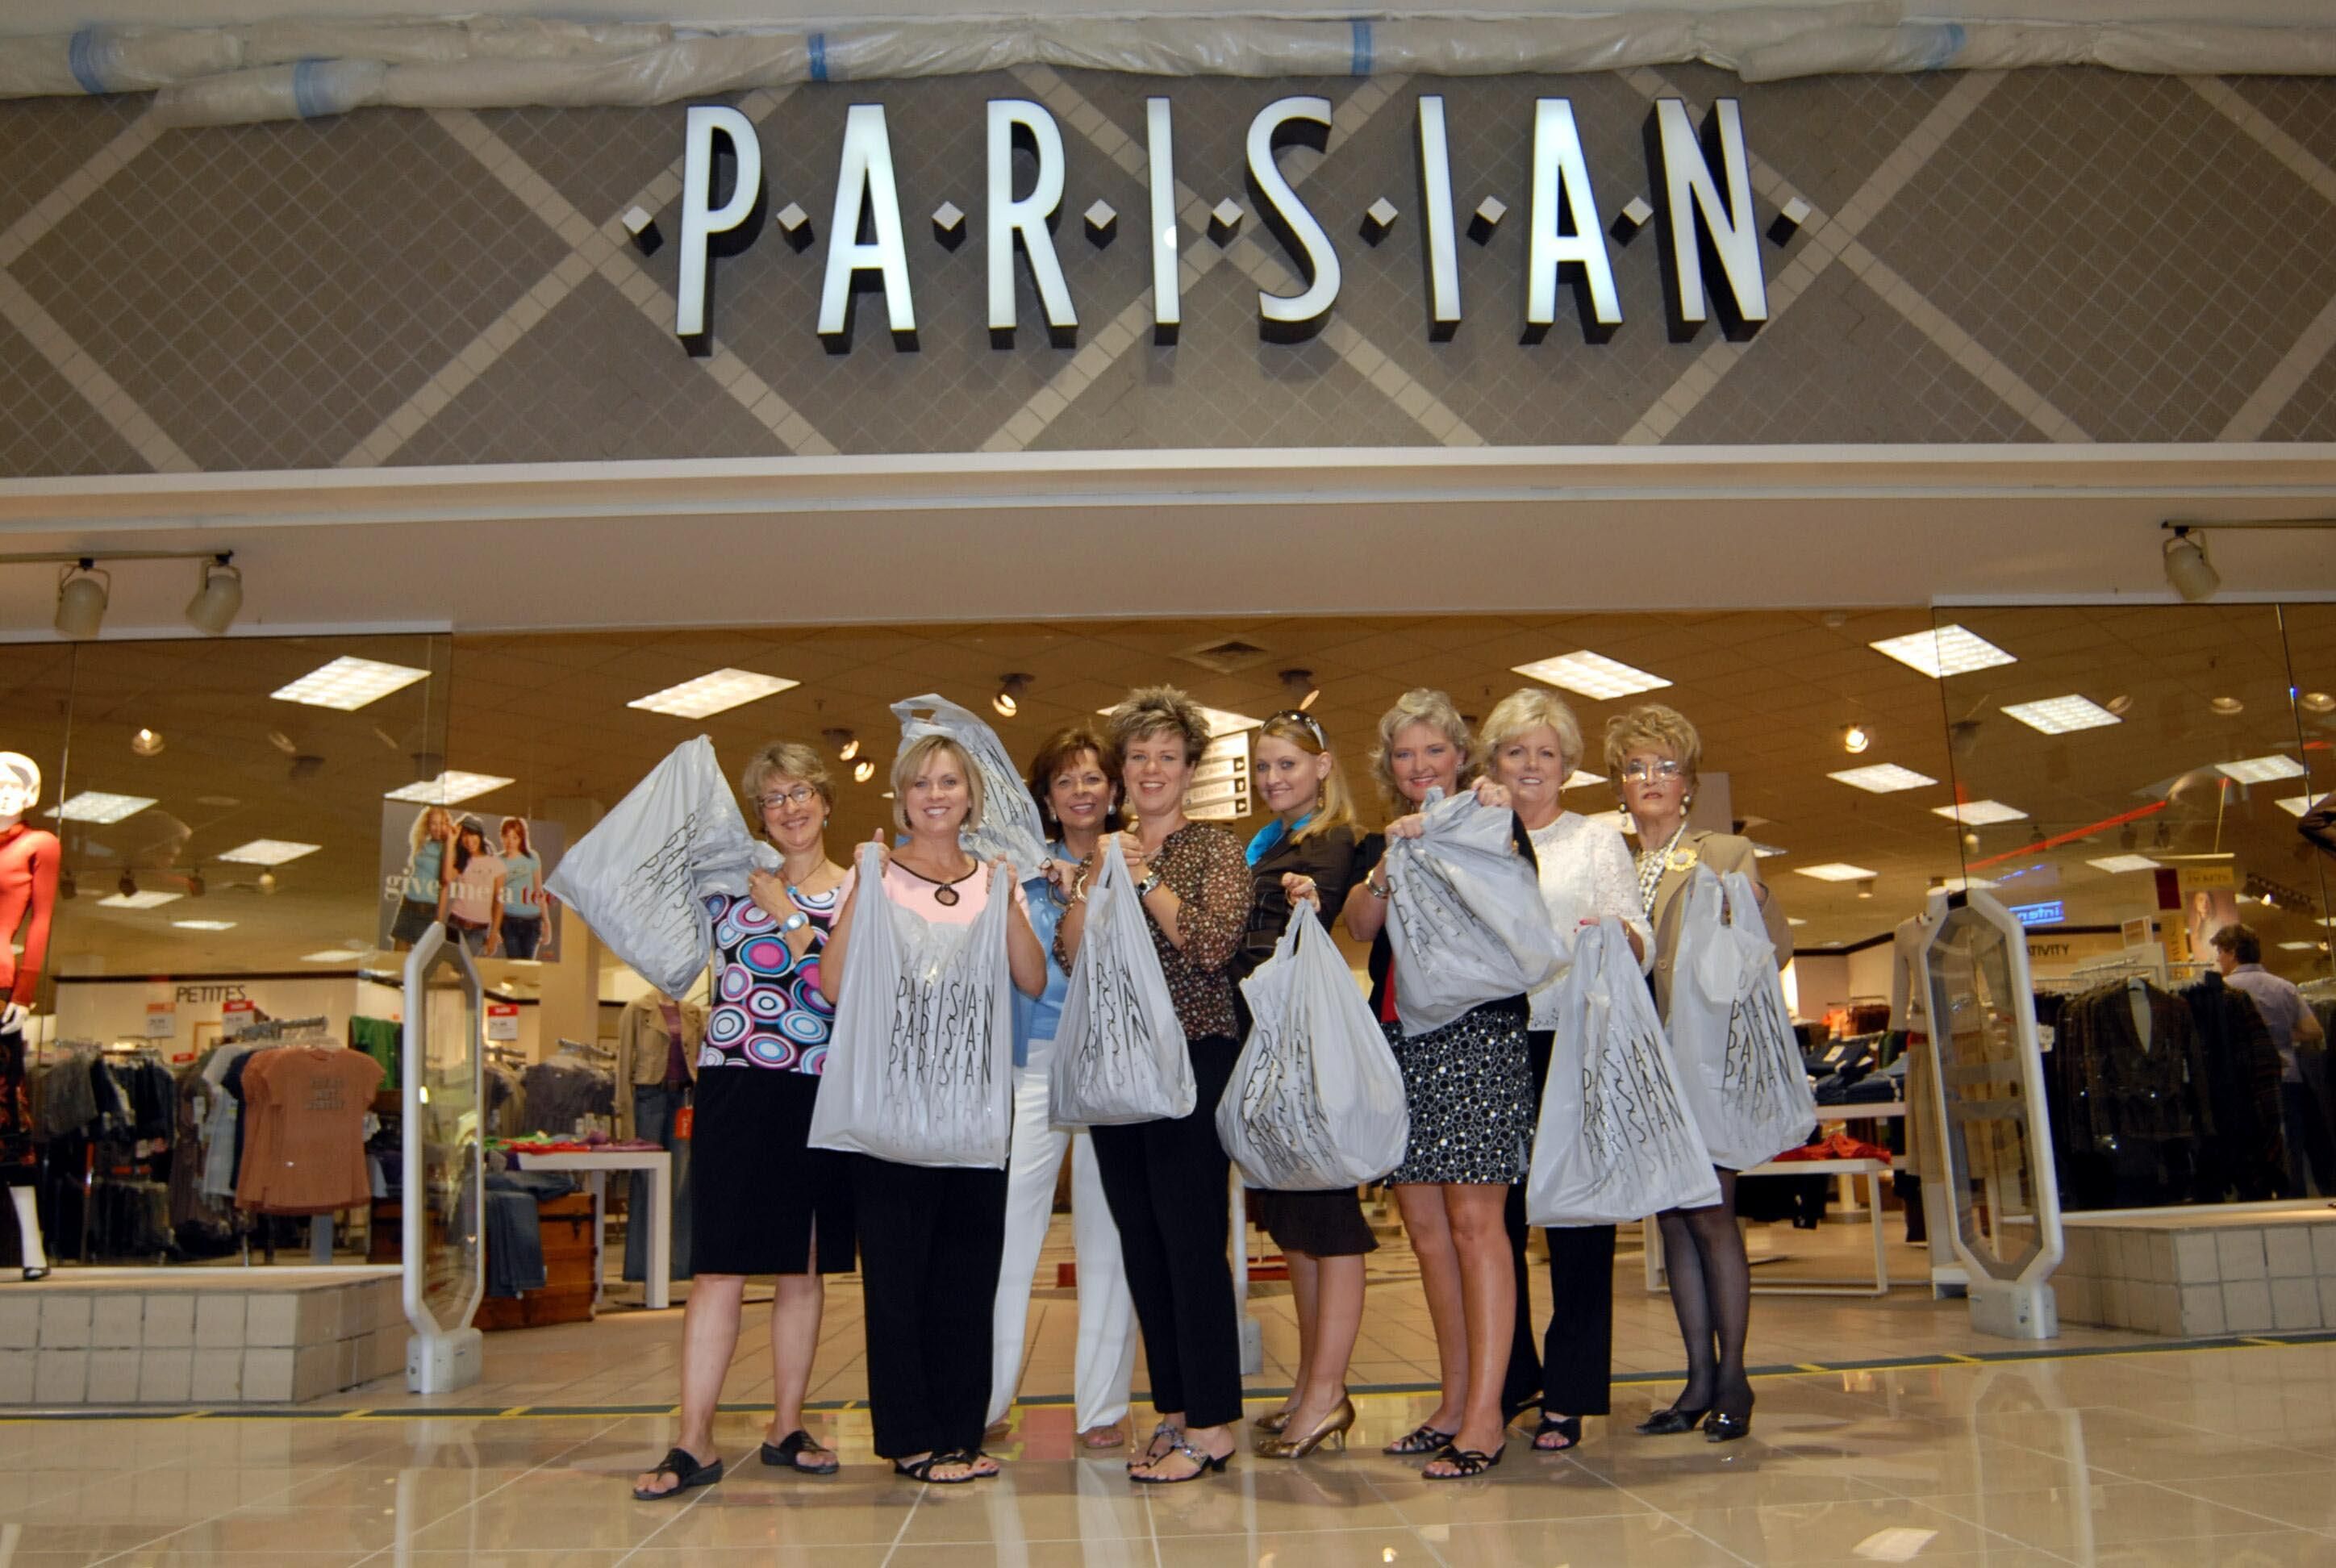 Shopping in the Parisian department stores